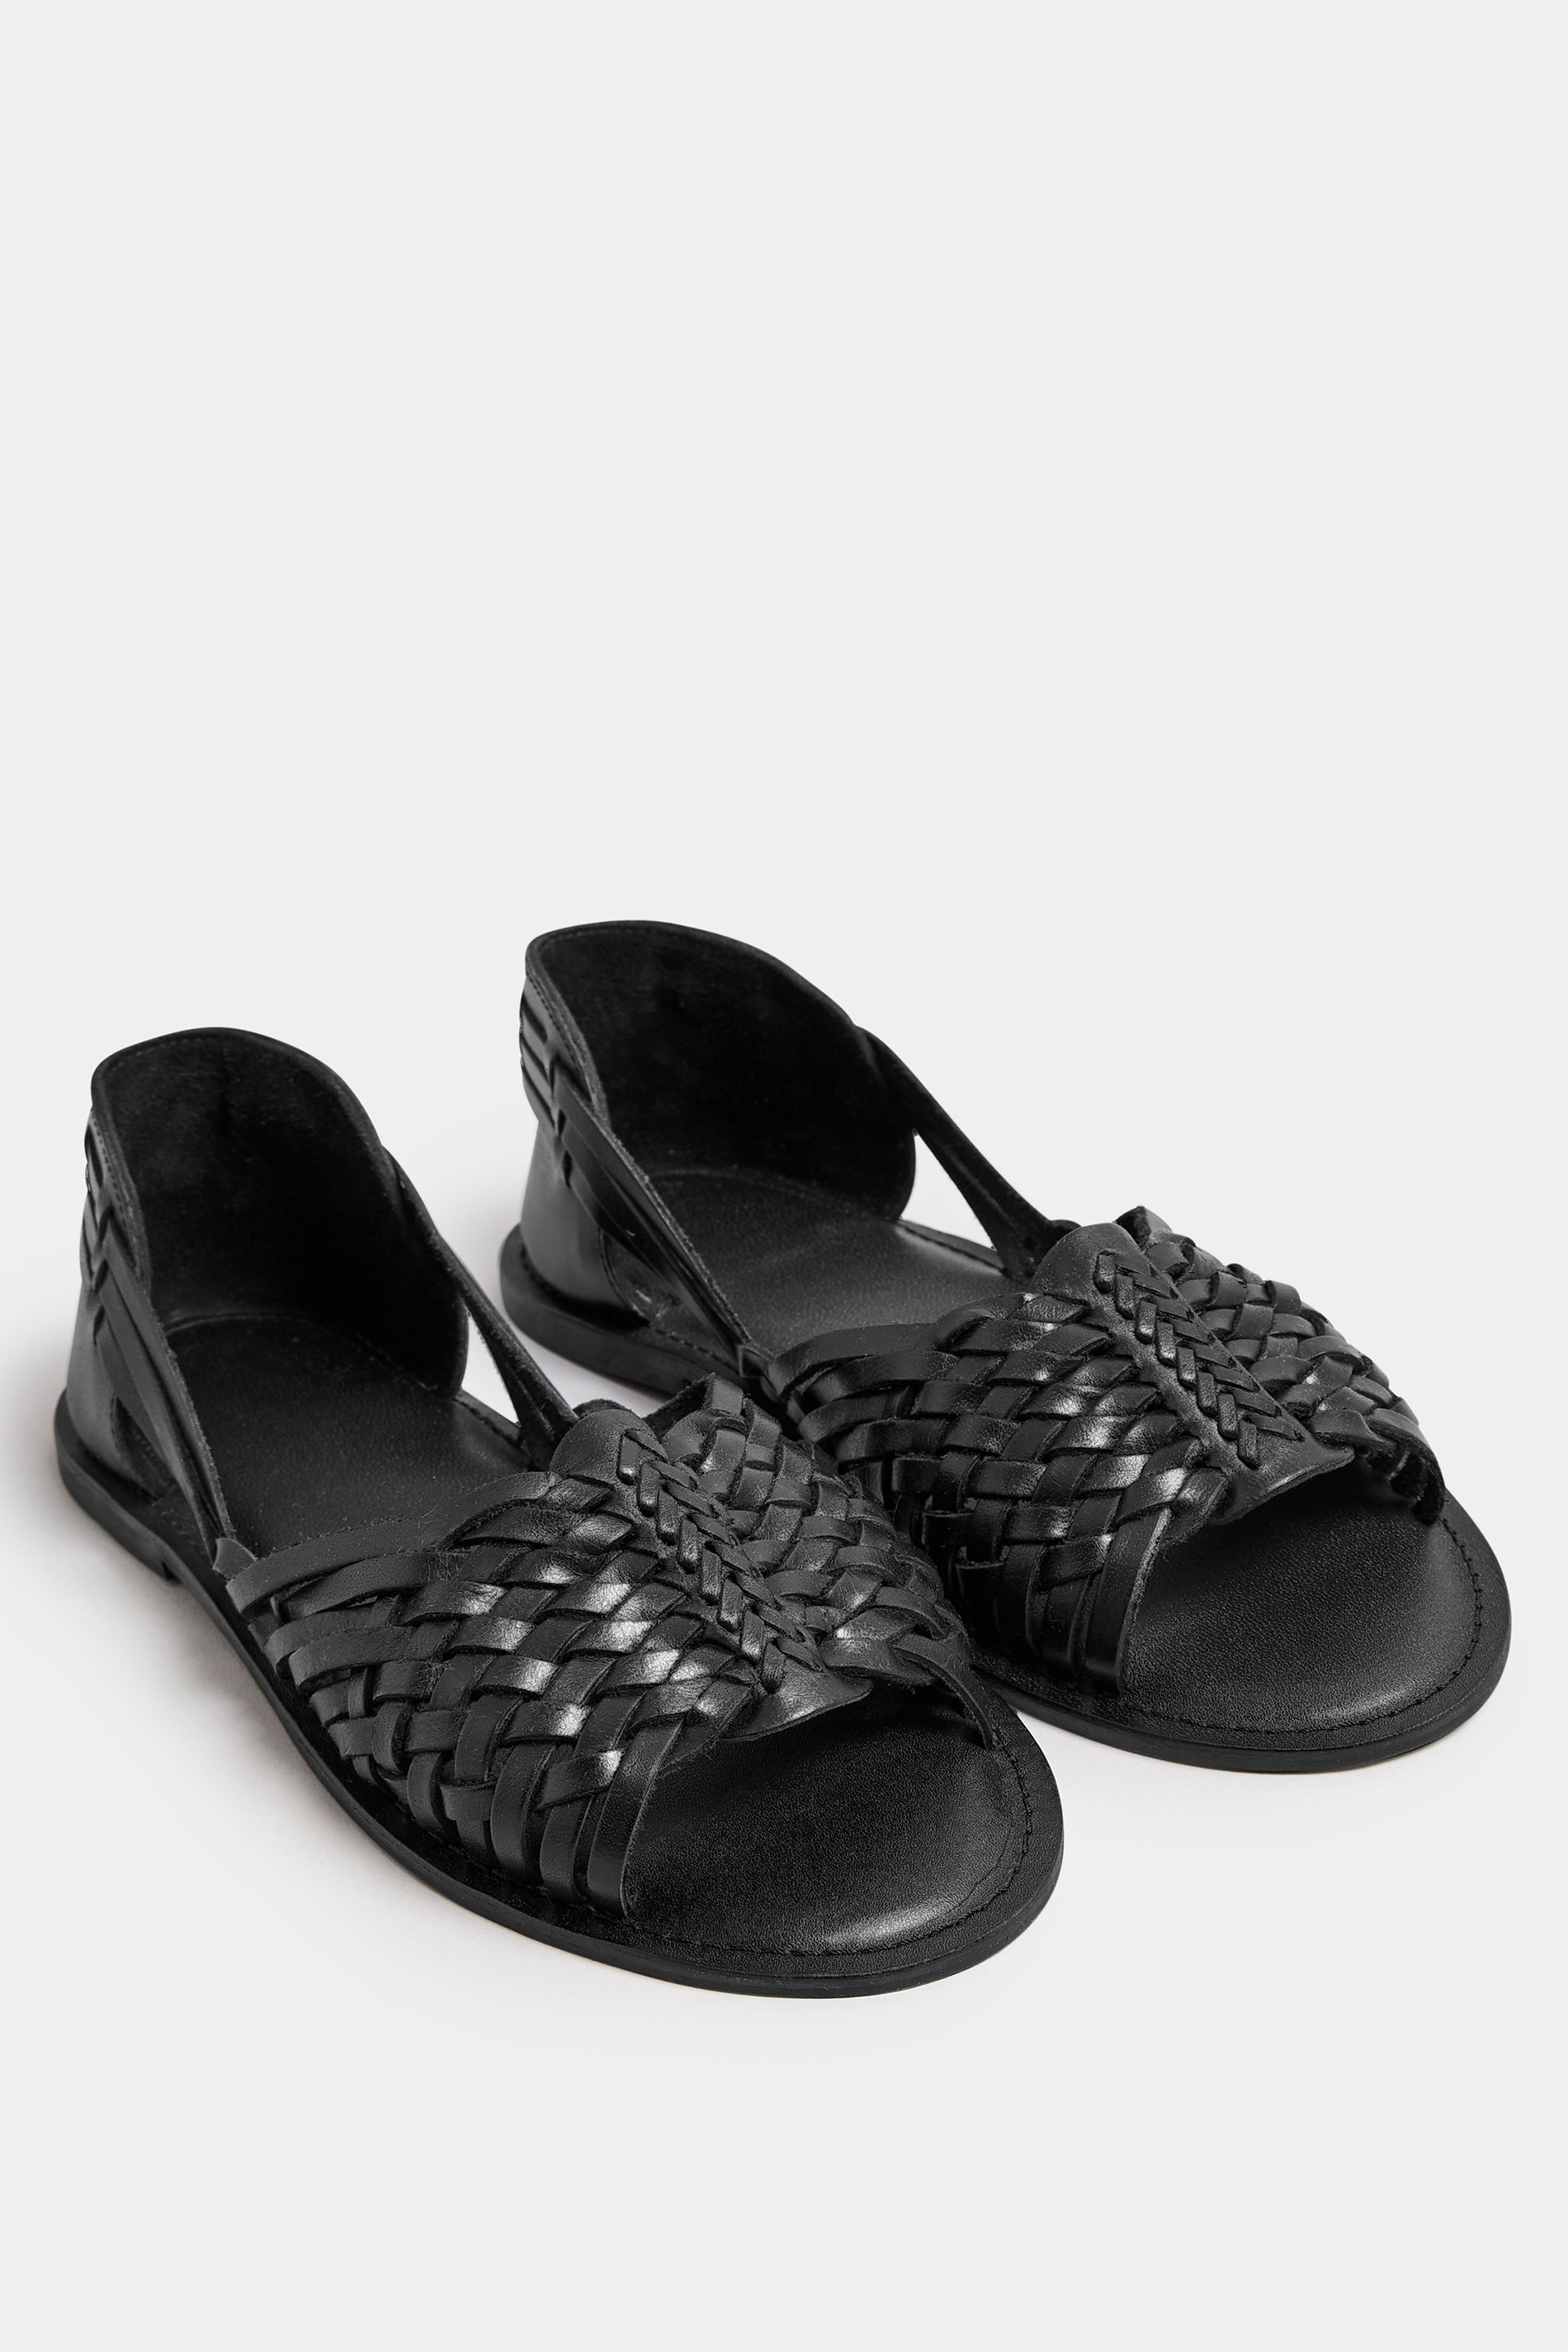 Black Woven Leather Mules In Extra Wide EEE Fit | Yours Clothing 2